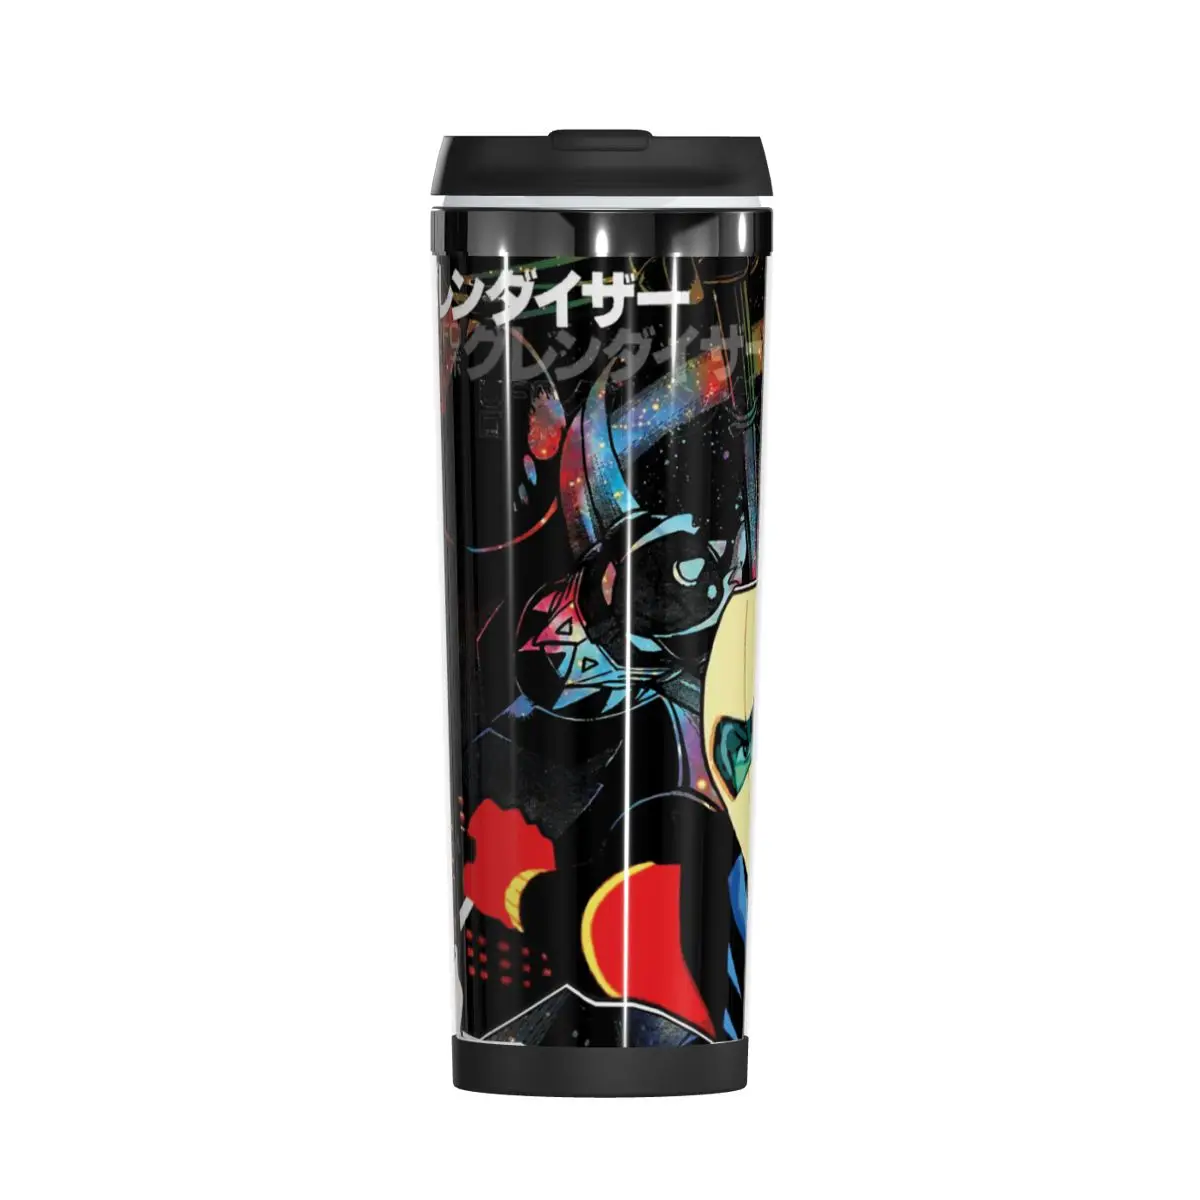 

Goldoraks Grendizer UFO Robot Double Insulated Water Cup Graphic Thermos flask Mug Humor Heat Insulation multi-function cups